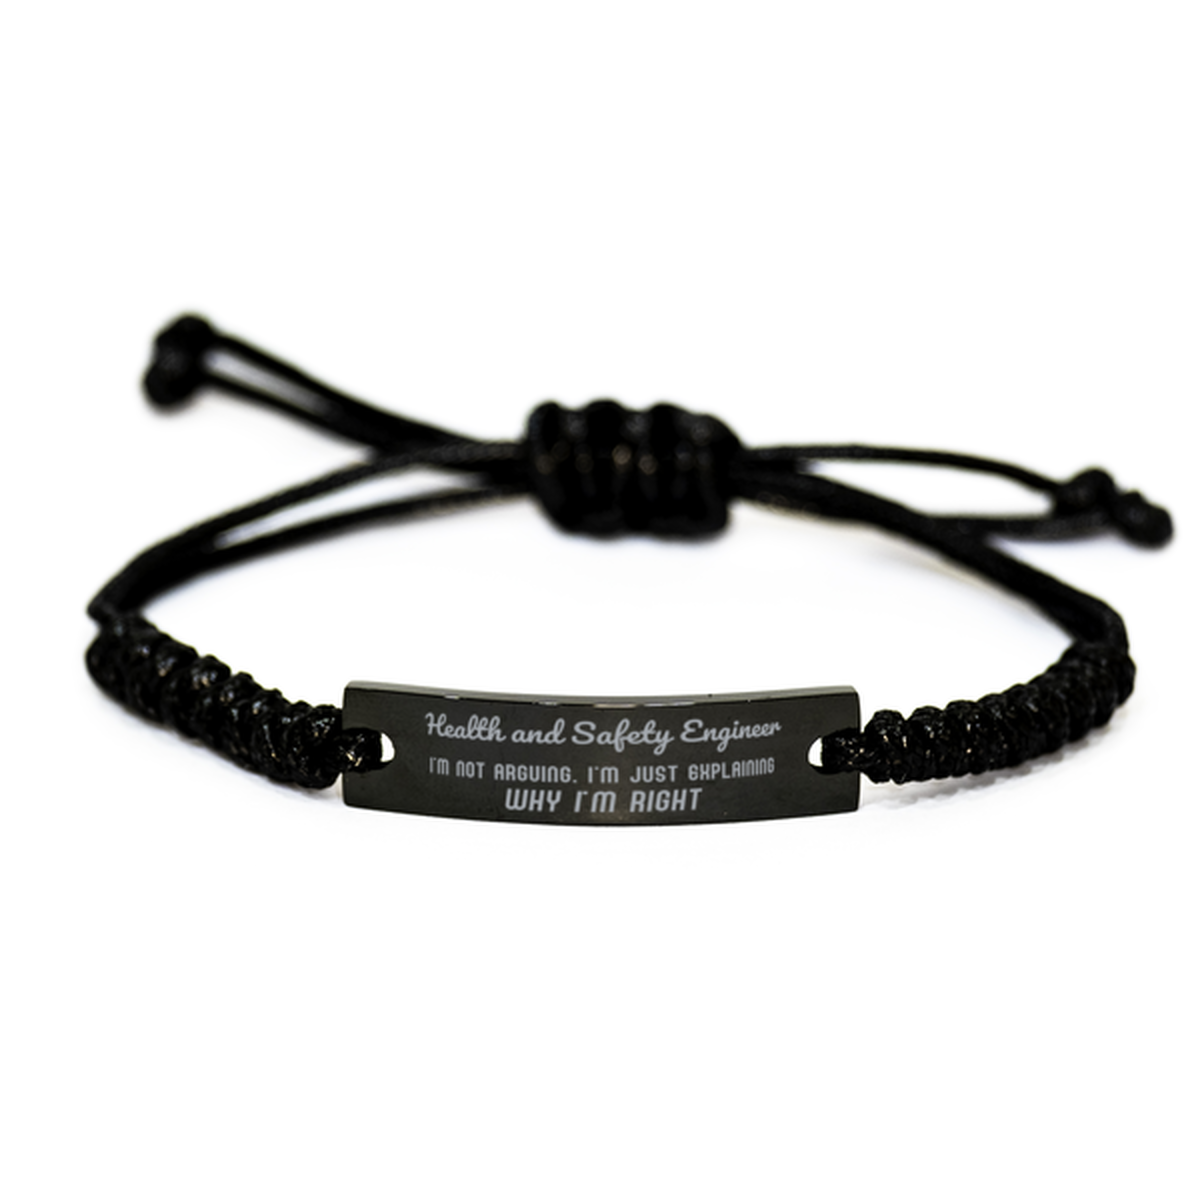 Health and Safety Engineer I'm not Arguing. I'm Just Explaining Why I'm RIGHT Black Rope Bracelet, Funny Saying Quote Health and Safety Engineer Gifts For Health and Safety Engineer Graduation Birthday Christmas Gifts for Men Women Coworker